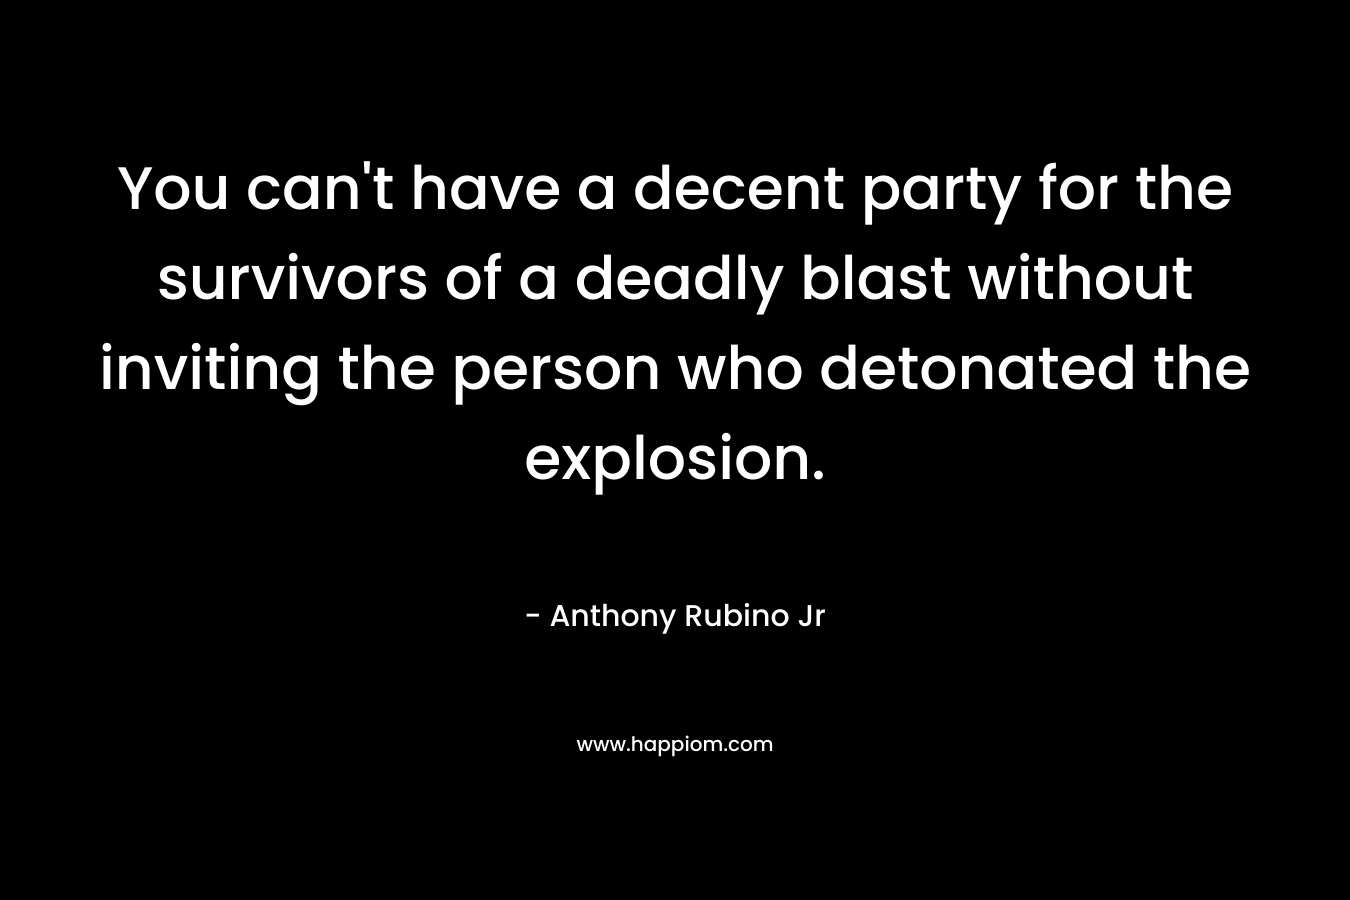 You can’t have a decent party for the survivors of a deadly blast without inviting the person who detonated the explosion. – Anthony Rubino Jr